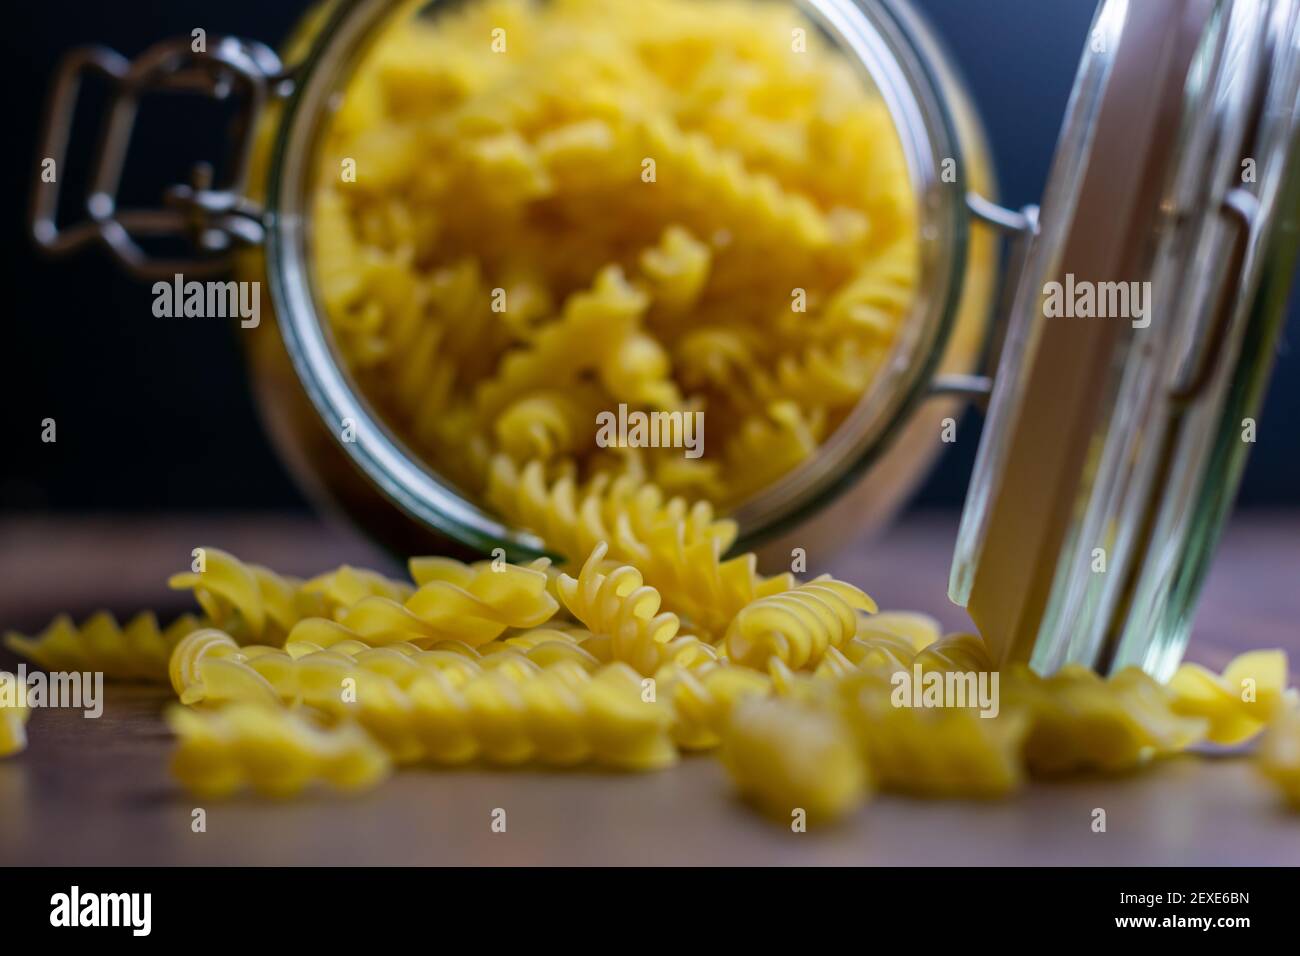 Fussili pasta falling out from a big air tight glass jar. Raw dry pasta in zero waste glass container. Messy food composition on dark background with Stock Photo